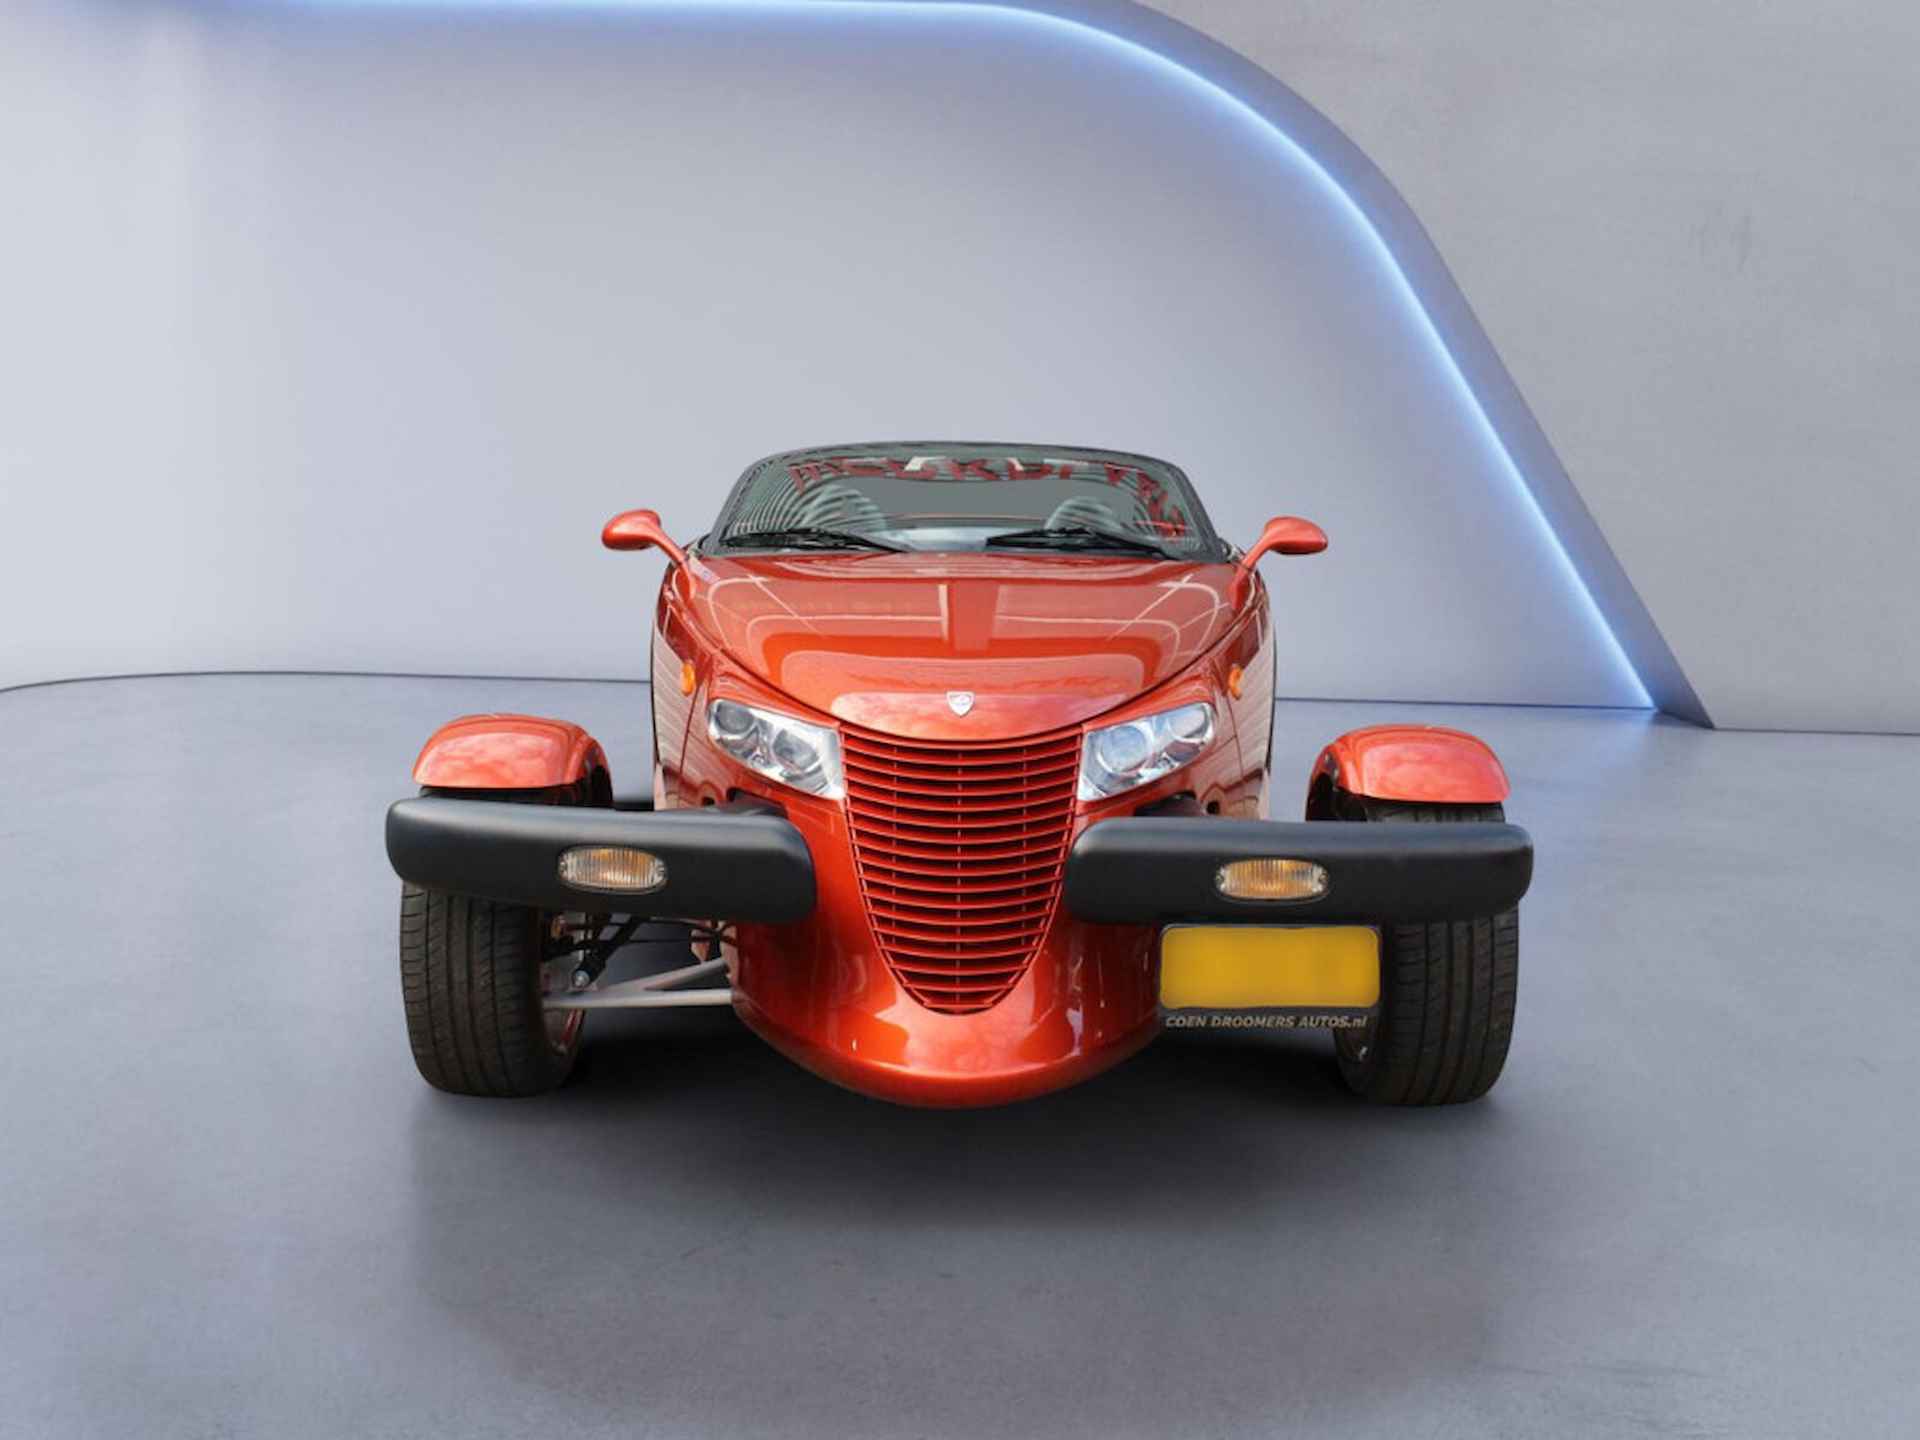 Plymouth Prowler Automaat 3.5i-V6 Youngtimer Nieuwe Cabriokap, Wind scherm Auto is in Concoursstaat. - 6/17